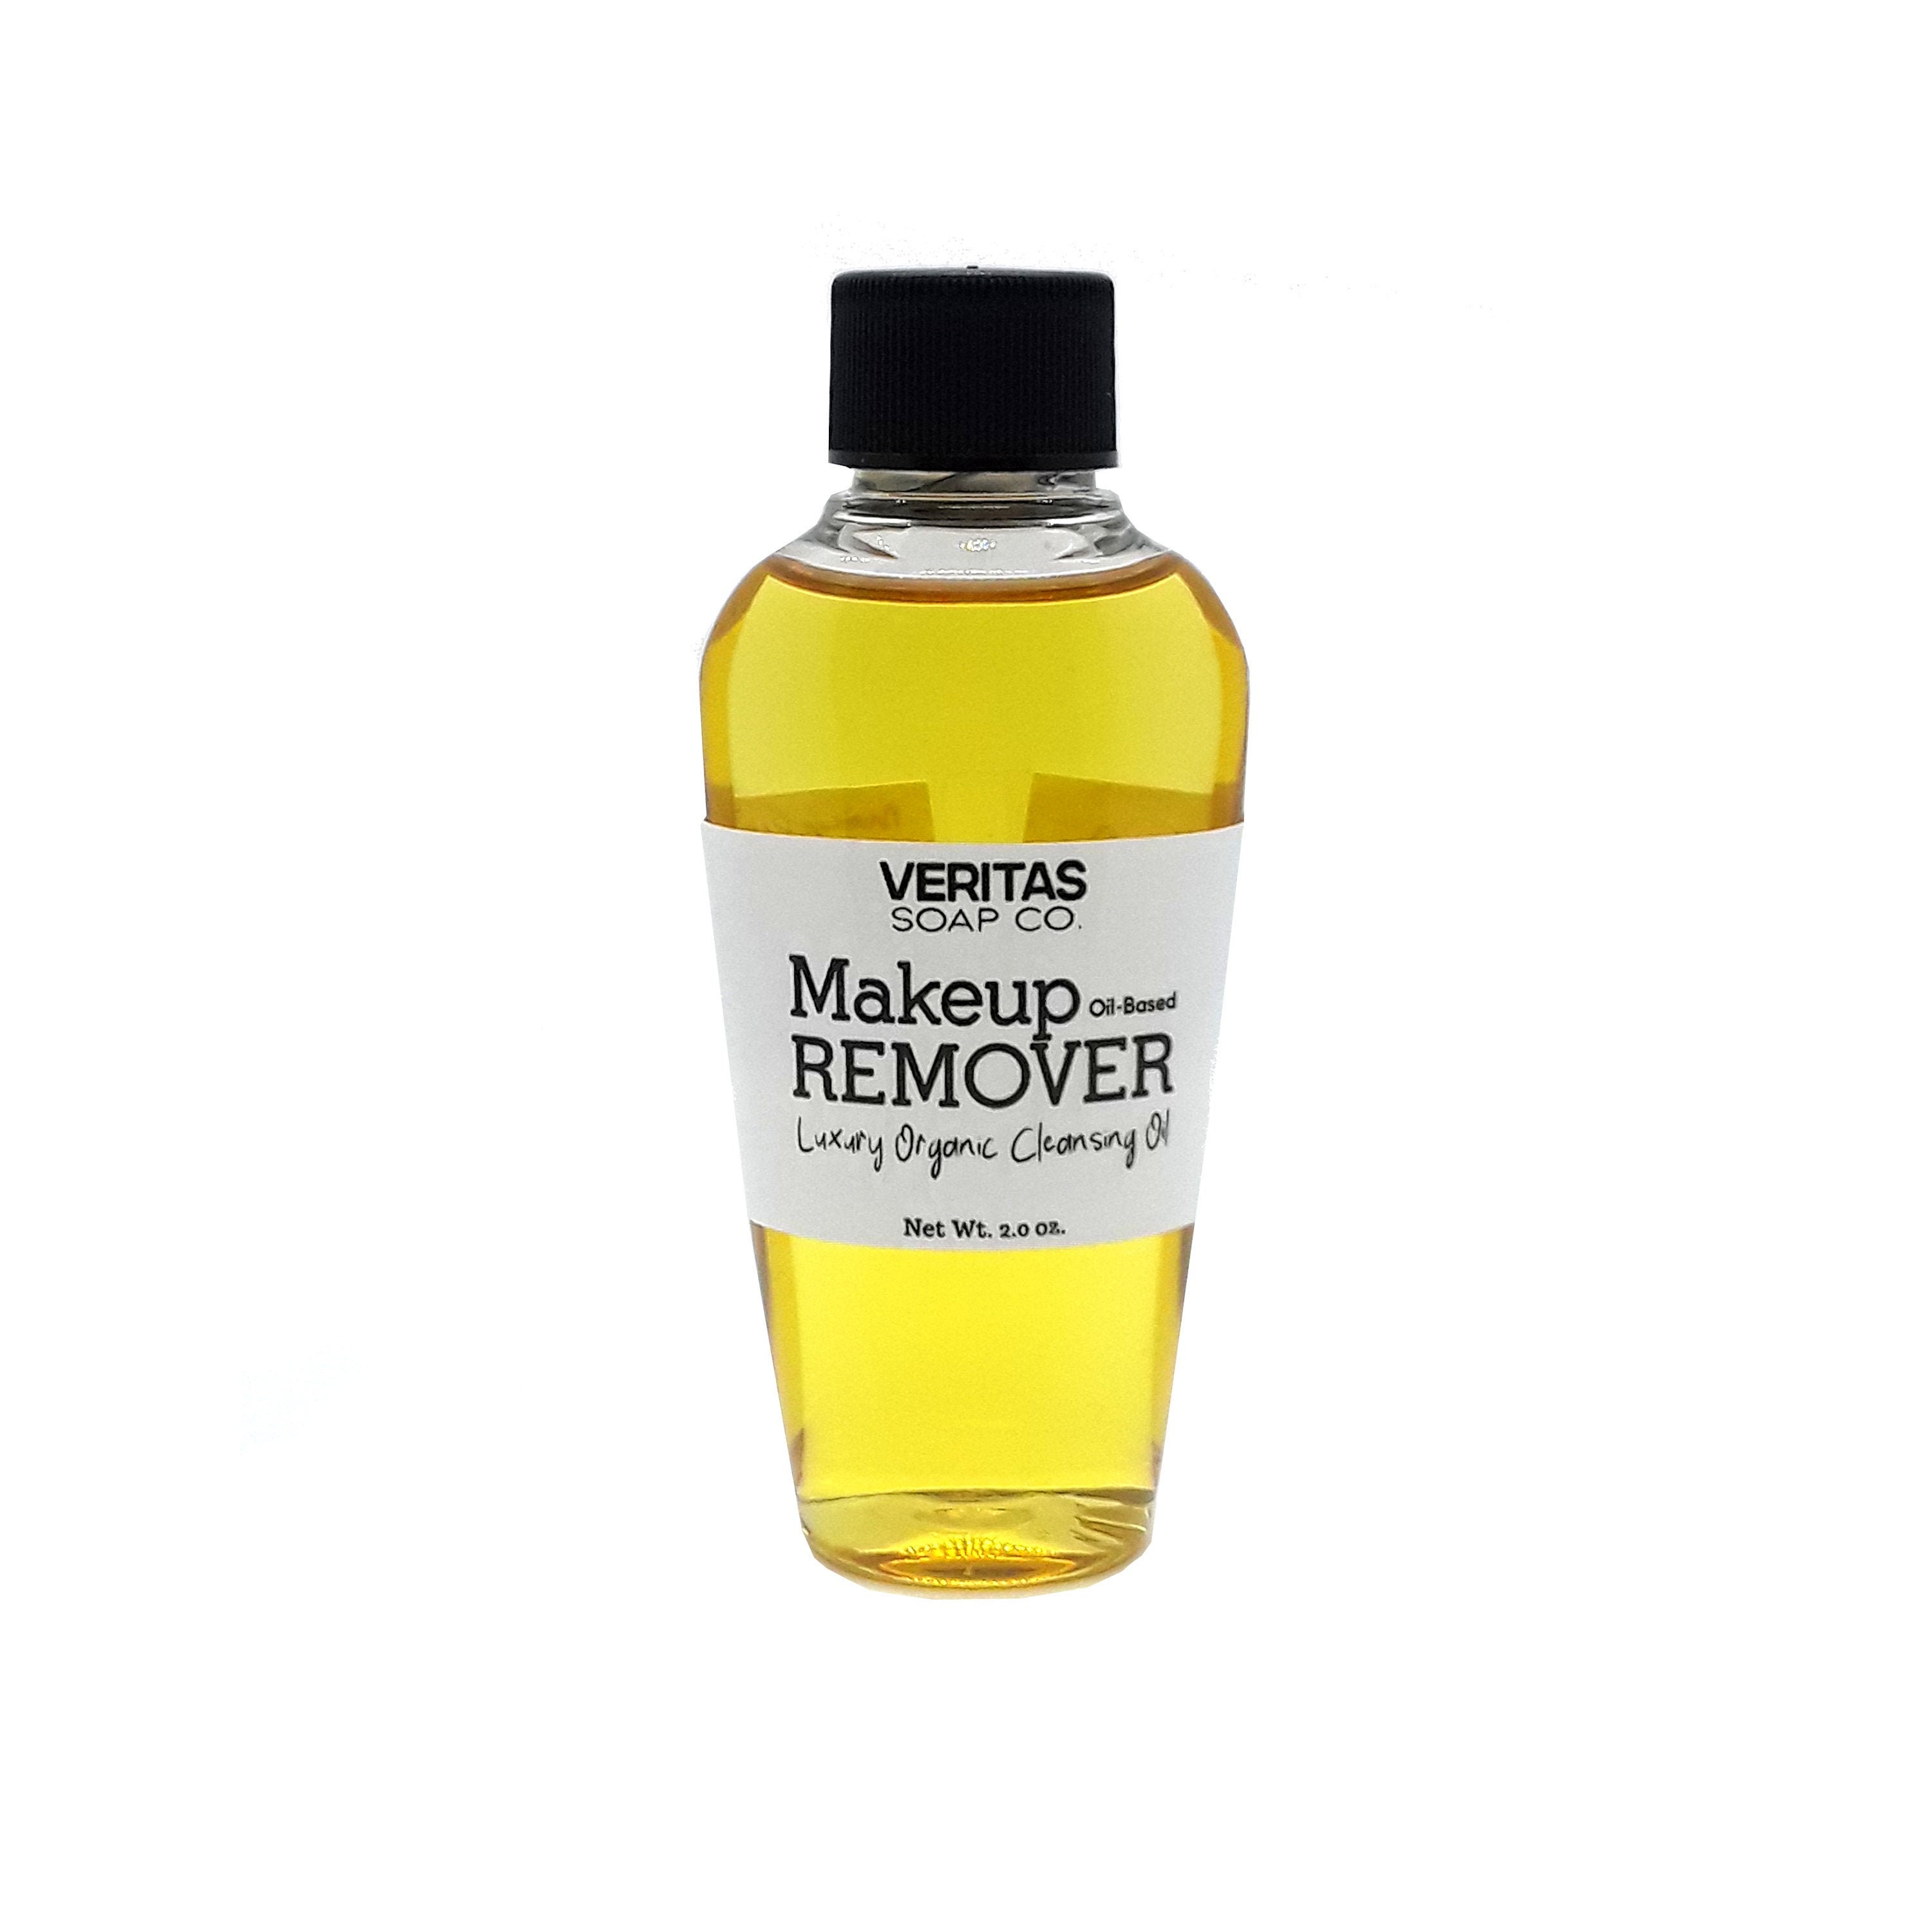 Makeup Remover - A Lovely Blend Of Organic Oils To Help Remove Long Wearing & Waterproof Makeup/Vegan 24 Hour Cleansing Oil